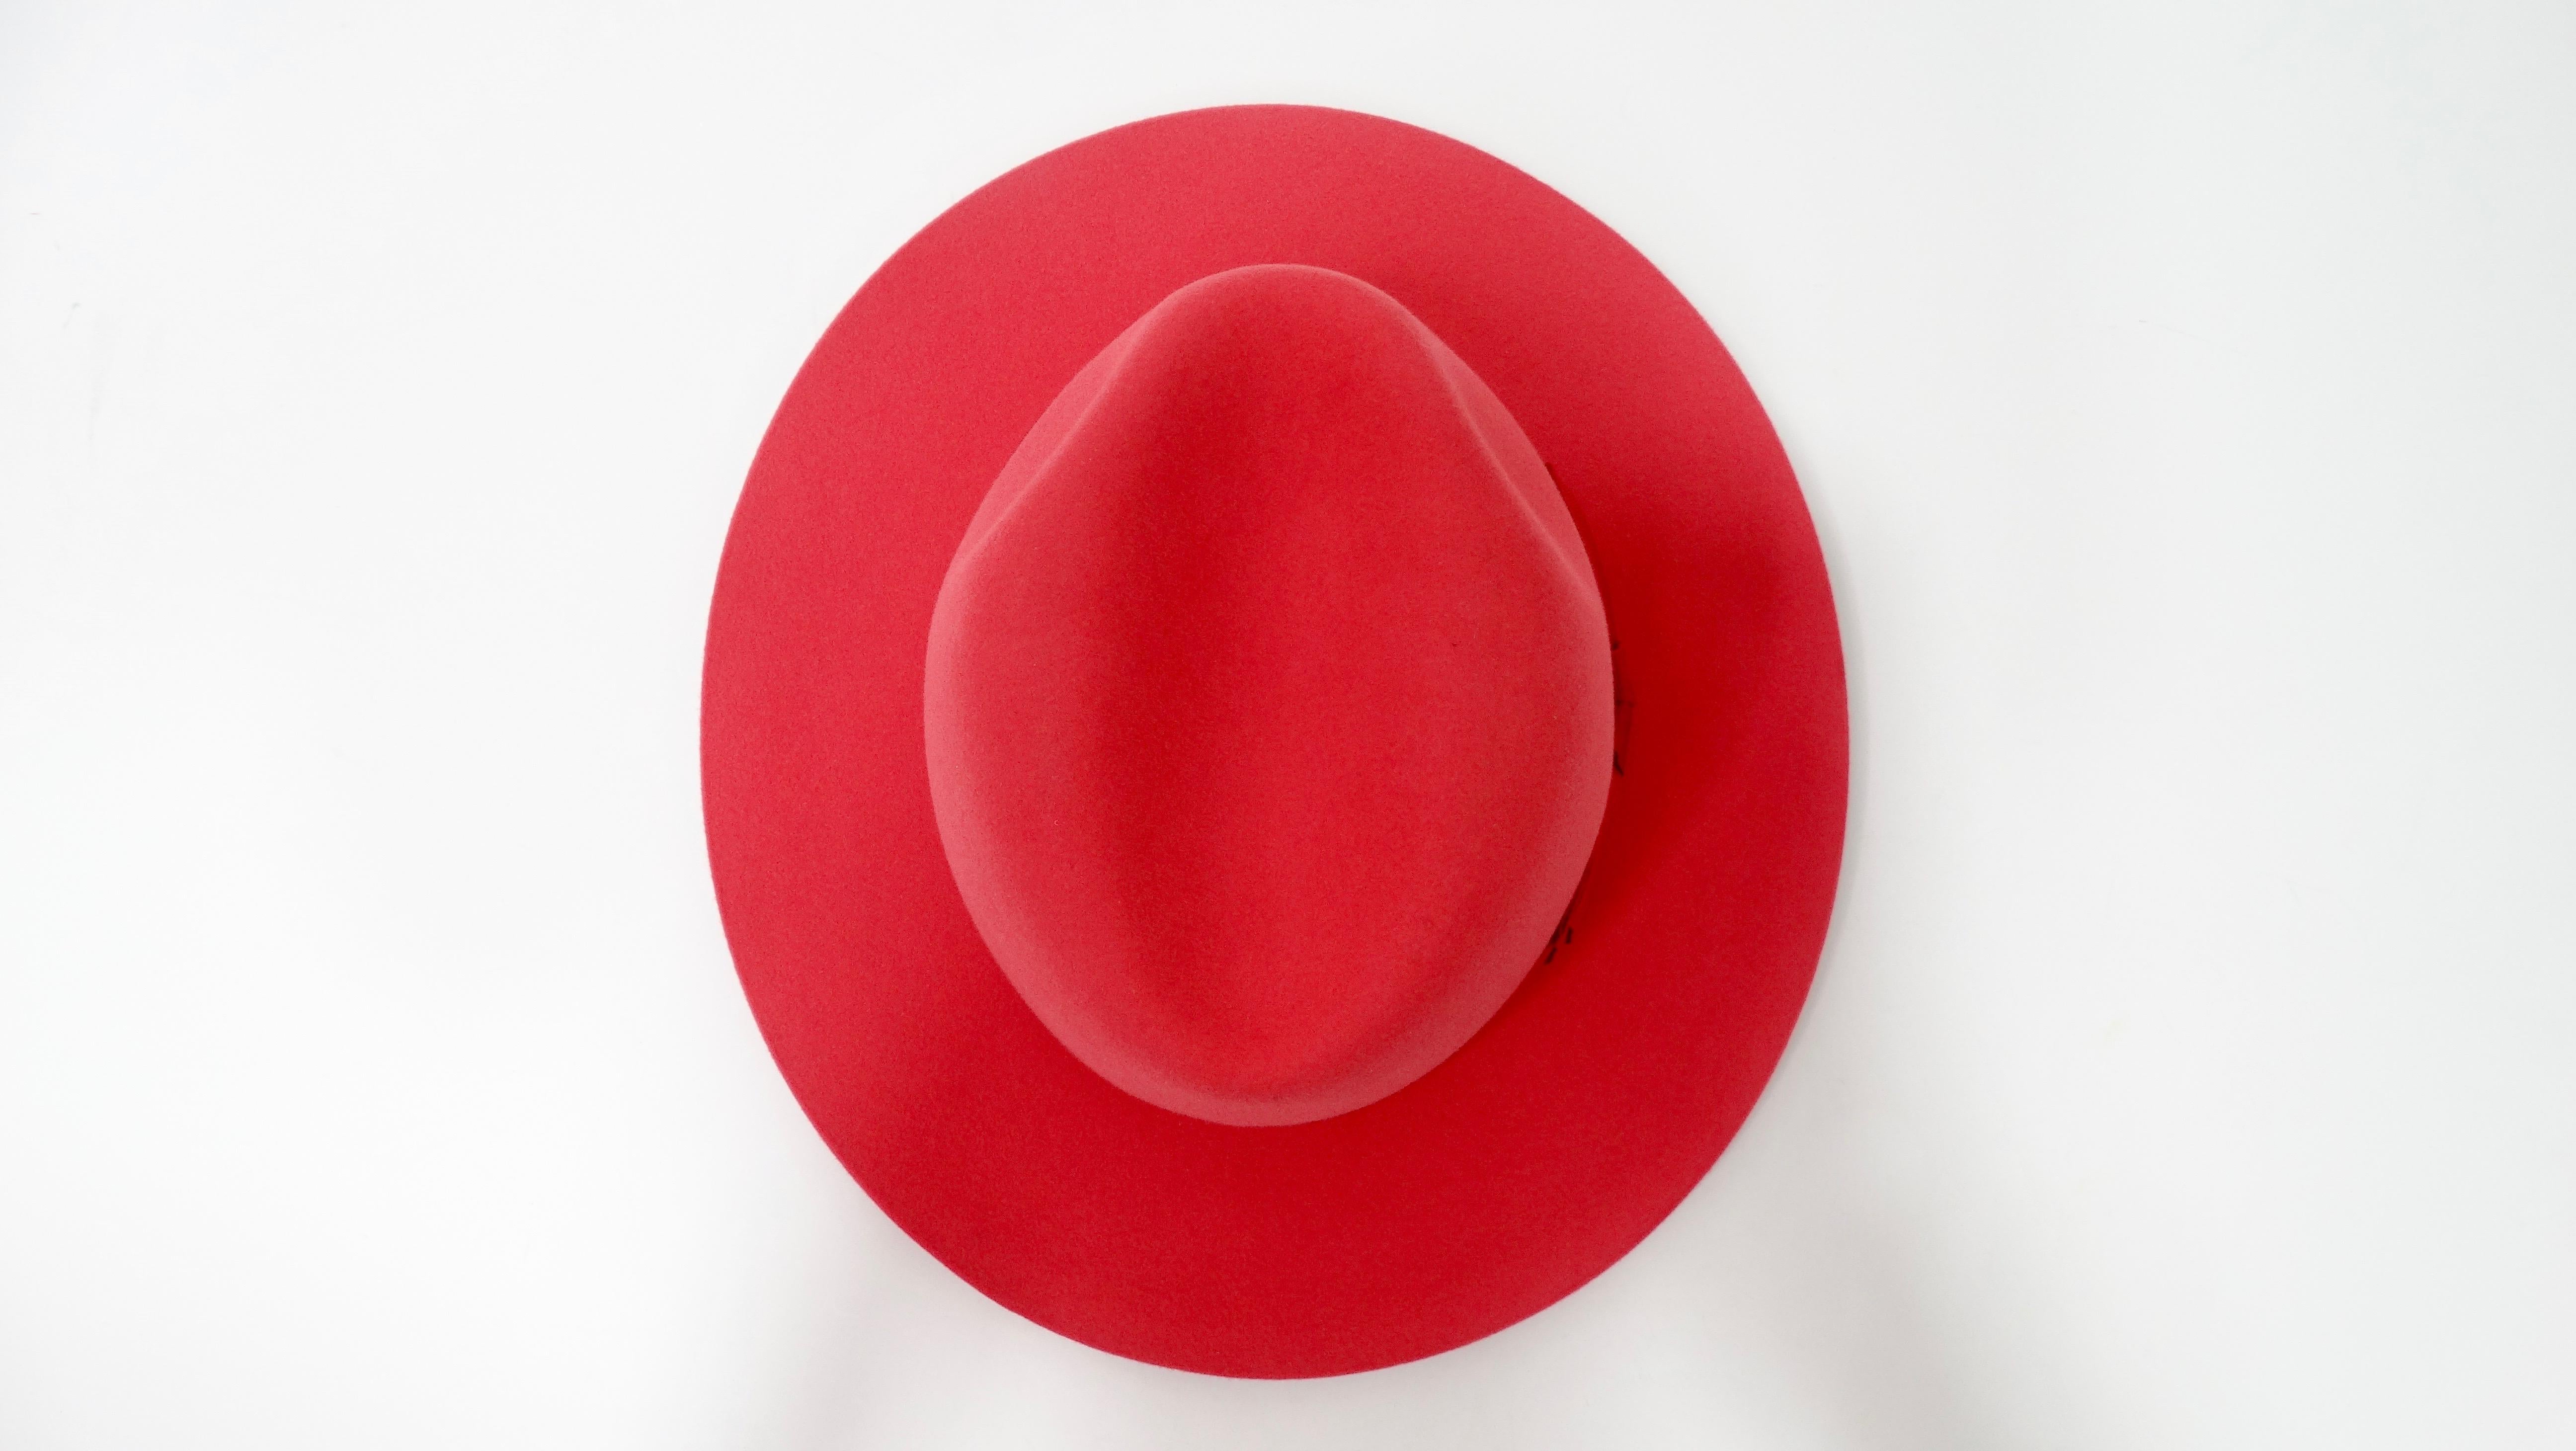 For the ultimate Hermés lover! Circa 21st century, this beautifully structured fedora is crafted from ultra soft rabbit felt with a rouge red finish. Around the base of the crown is a grosgrian rouge red ribbon. Interior is lined with an Hermés